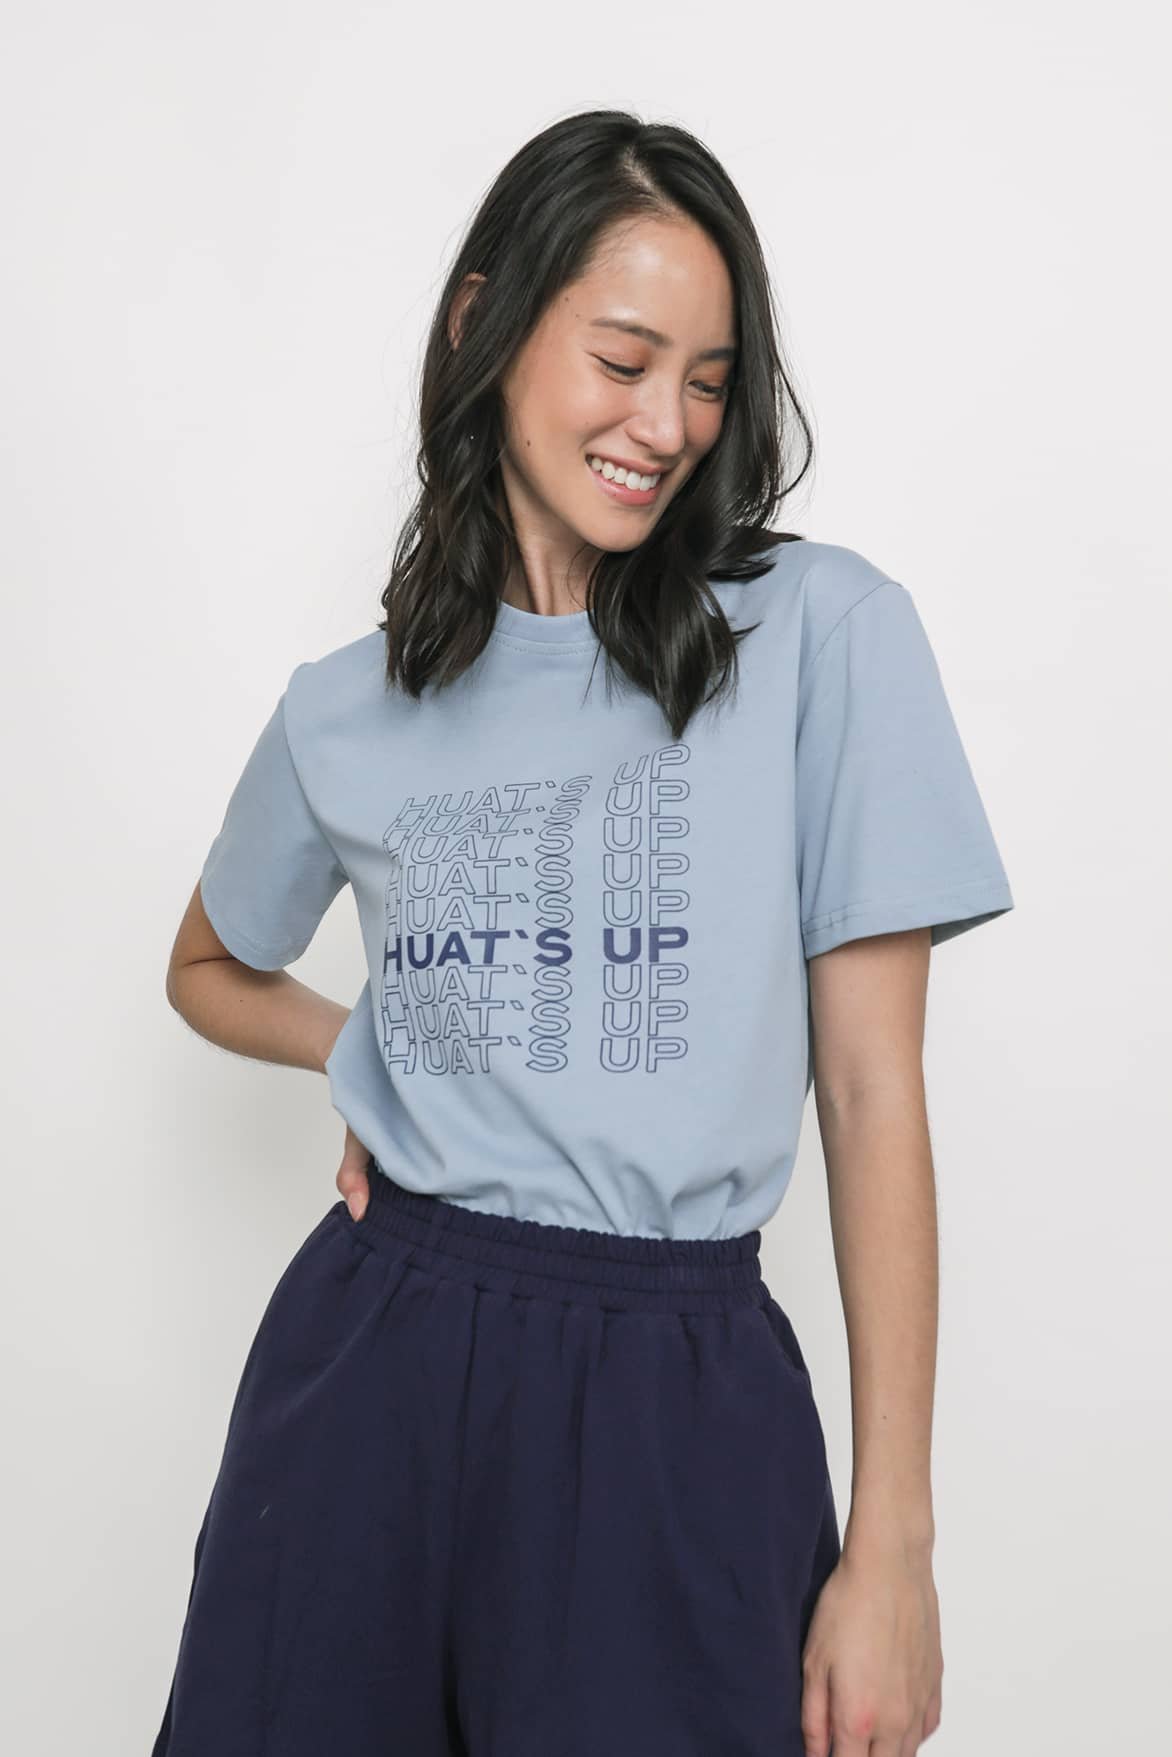 Huat's Up Tee (Navy) Limited Edition